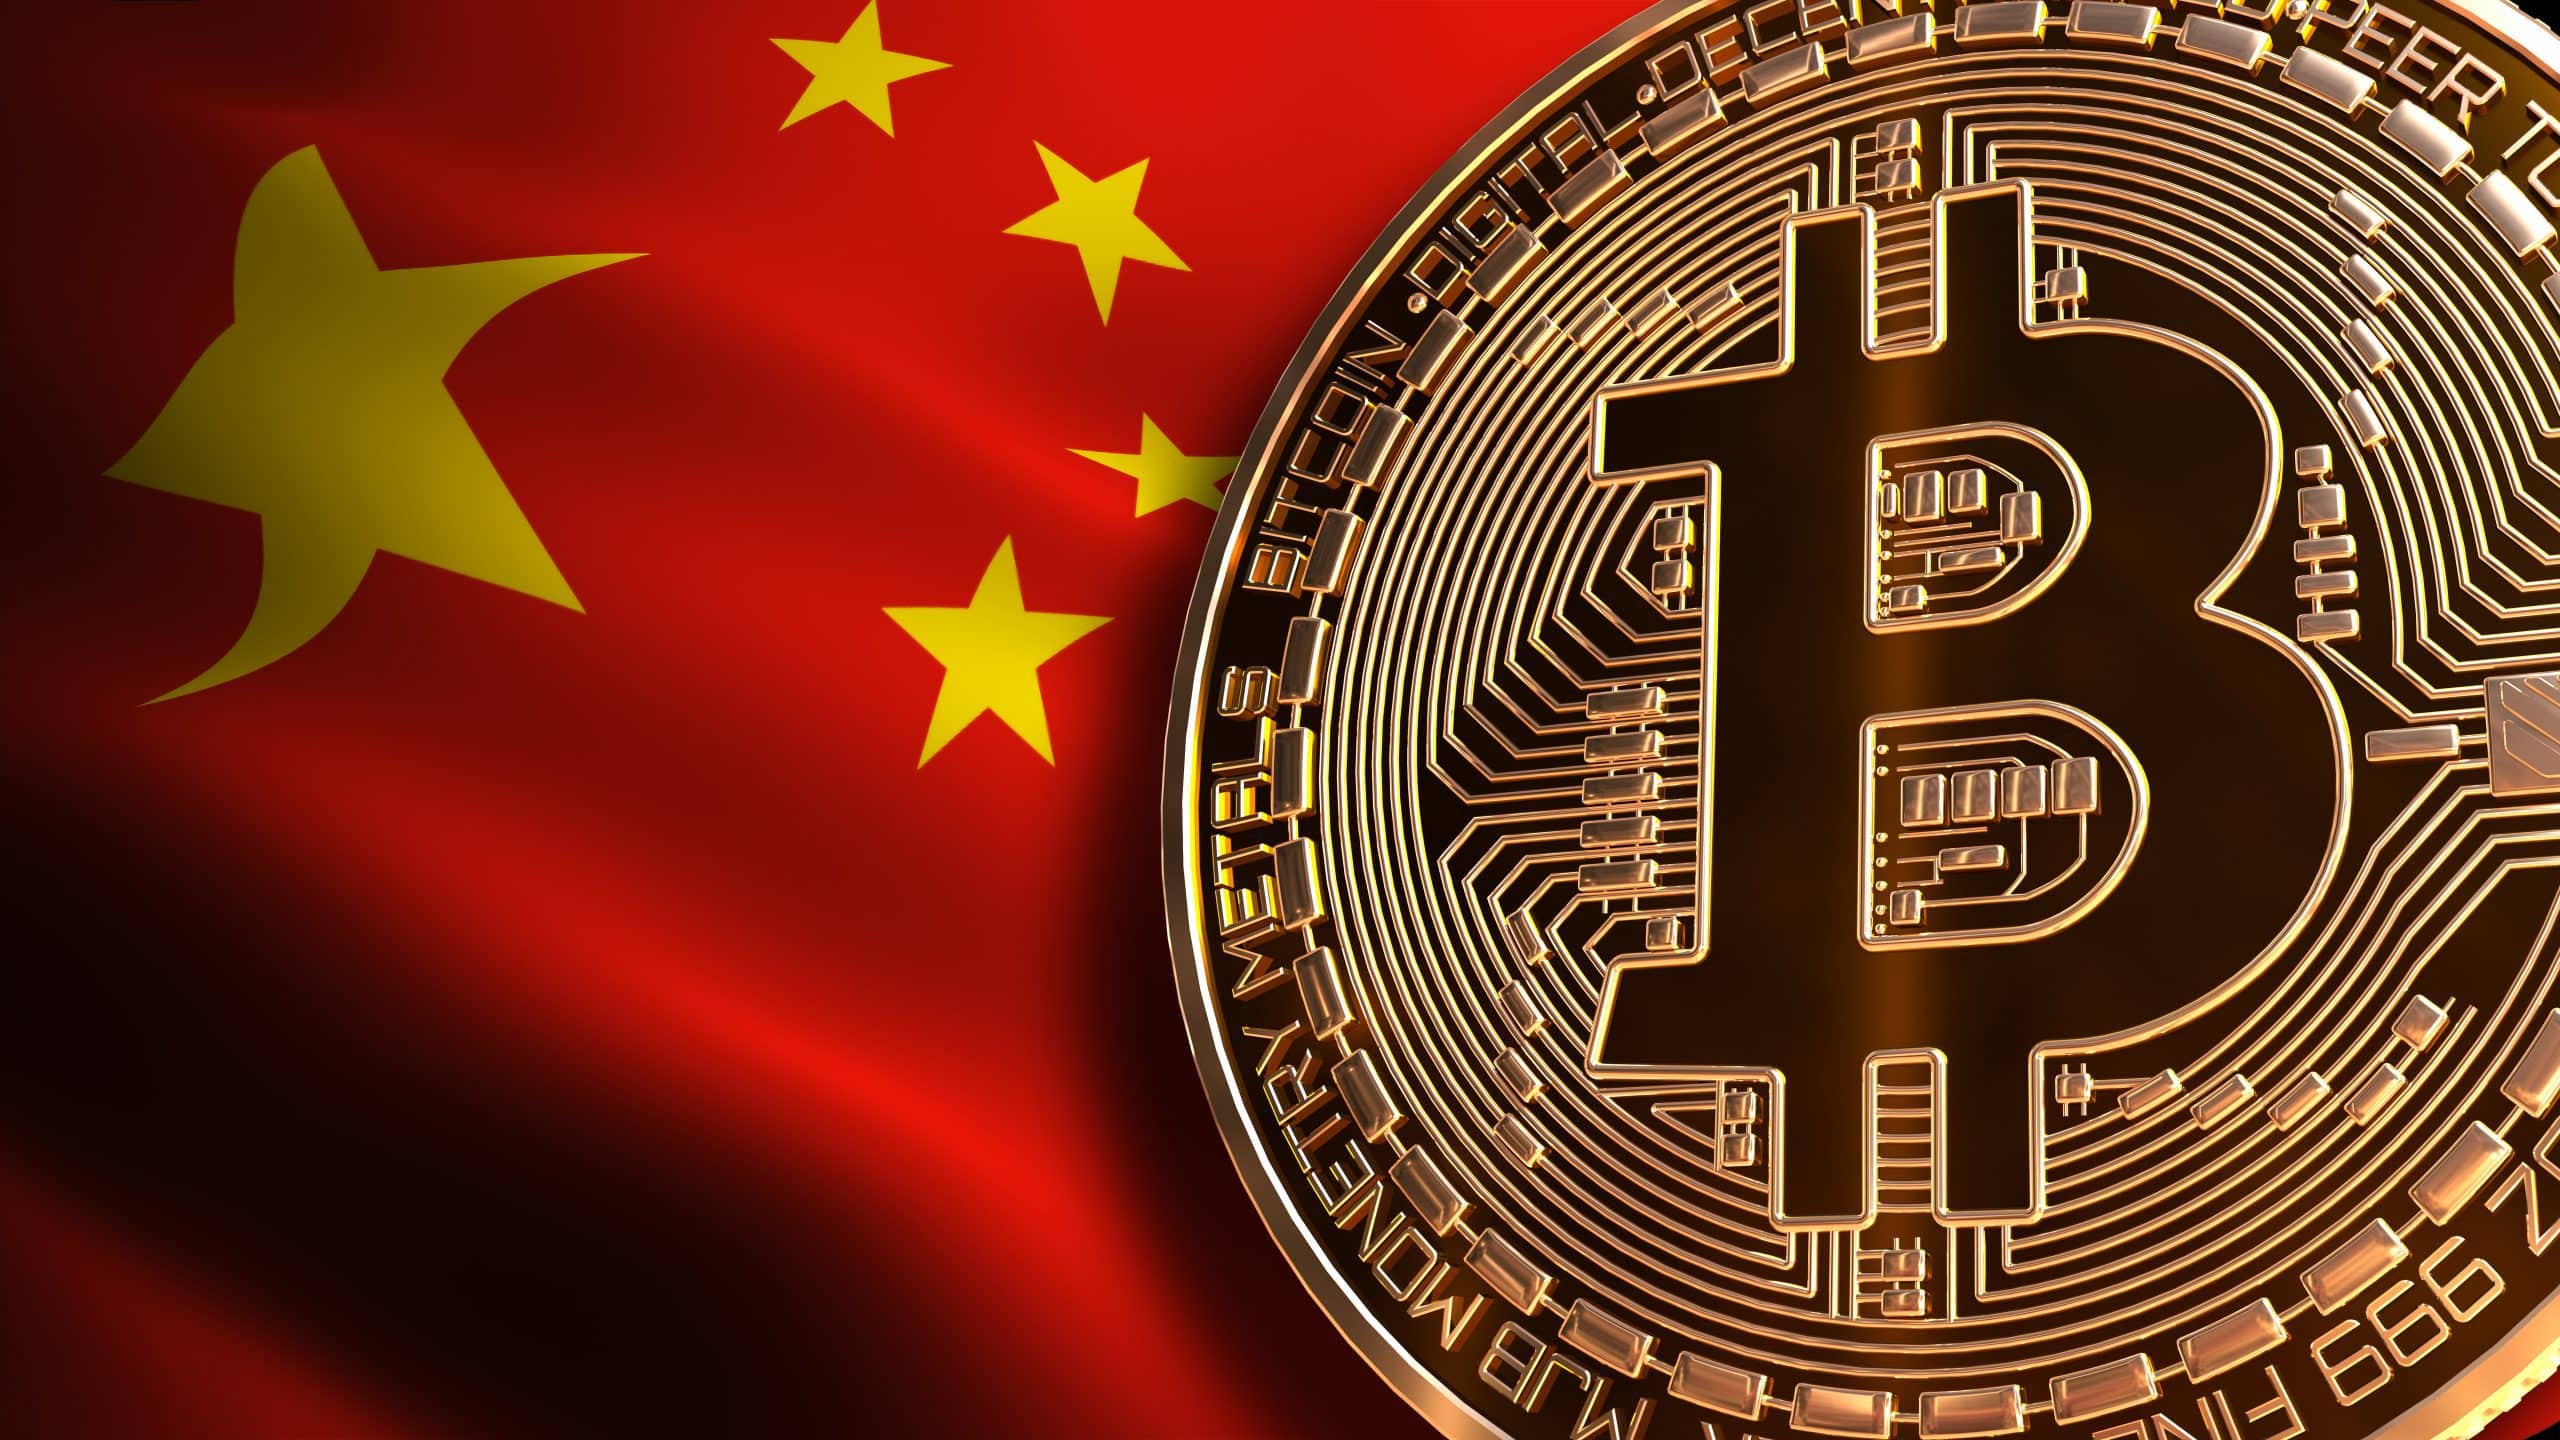 Why China dominates the mining industry despite the BTC ban